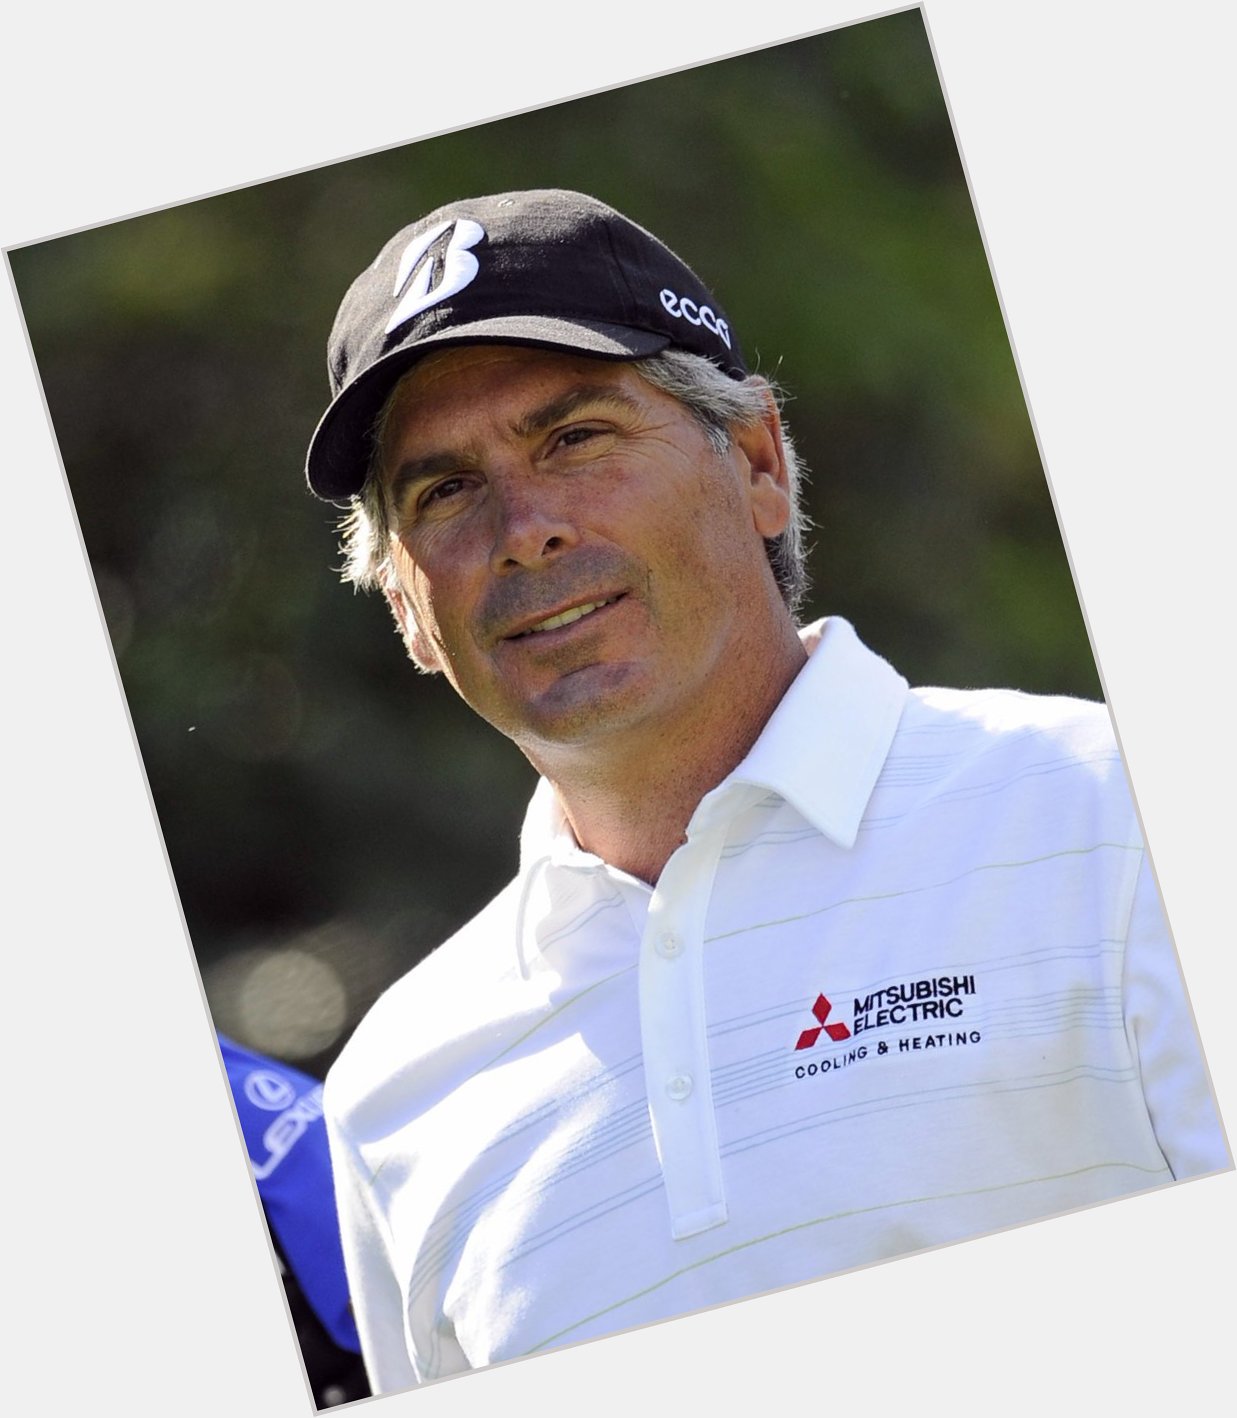 Golfsleepplay: Happy 59th Birthday Fred Couples. One of my favourite golfers growing up and such a sweet swing! 